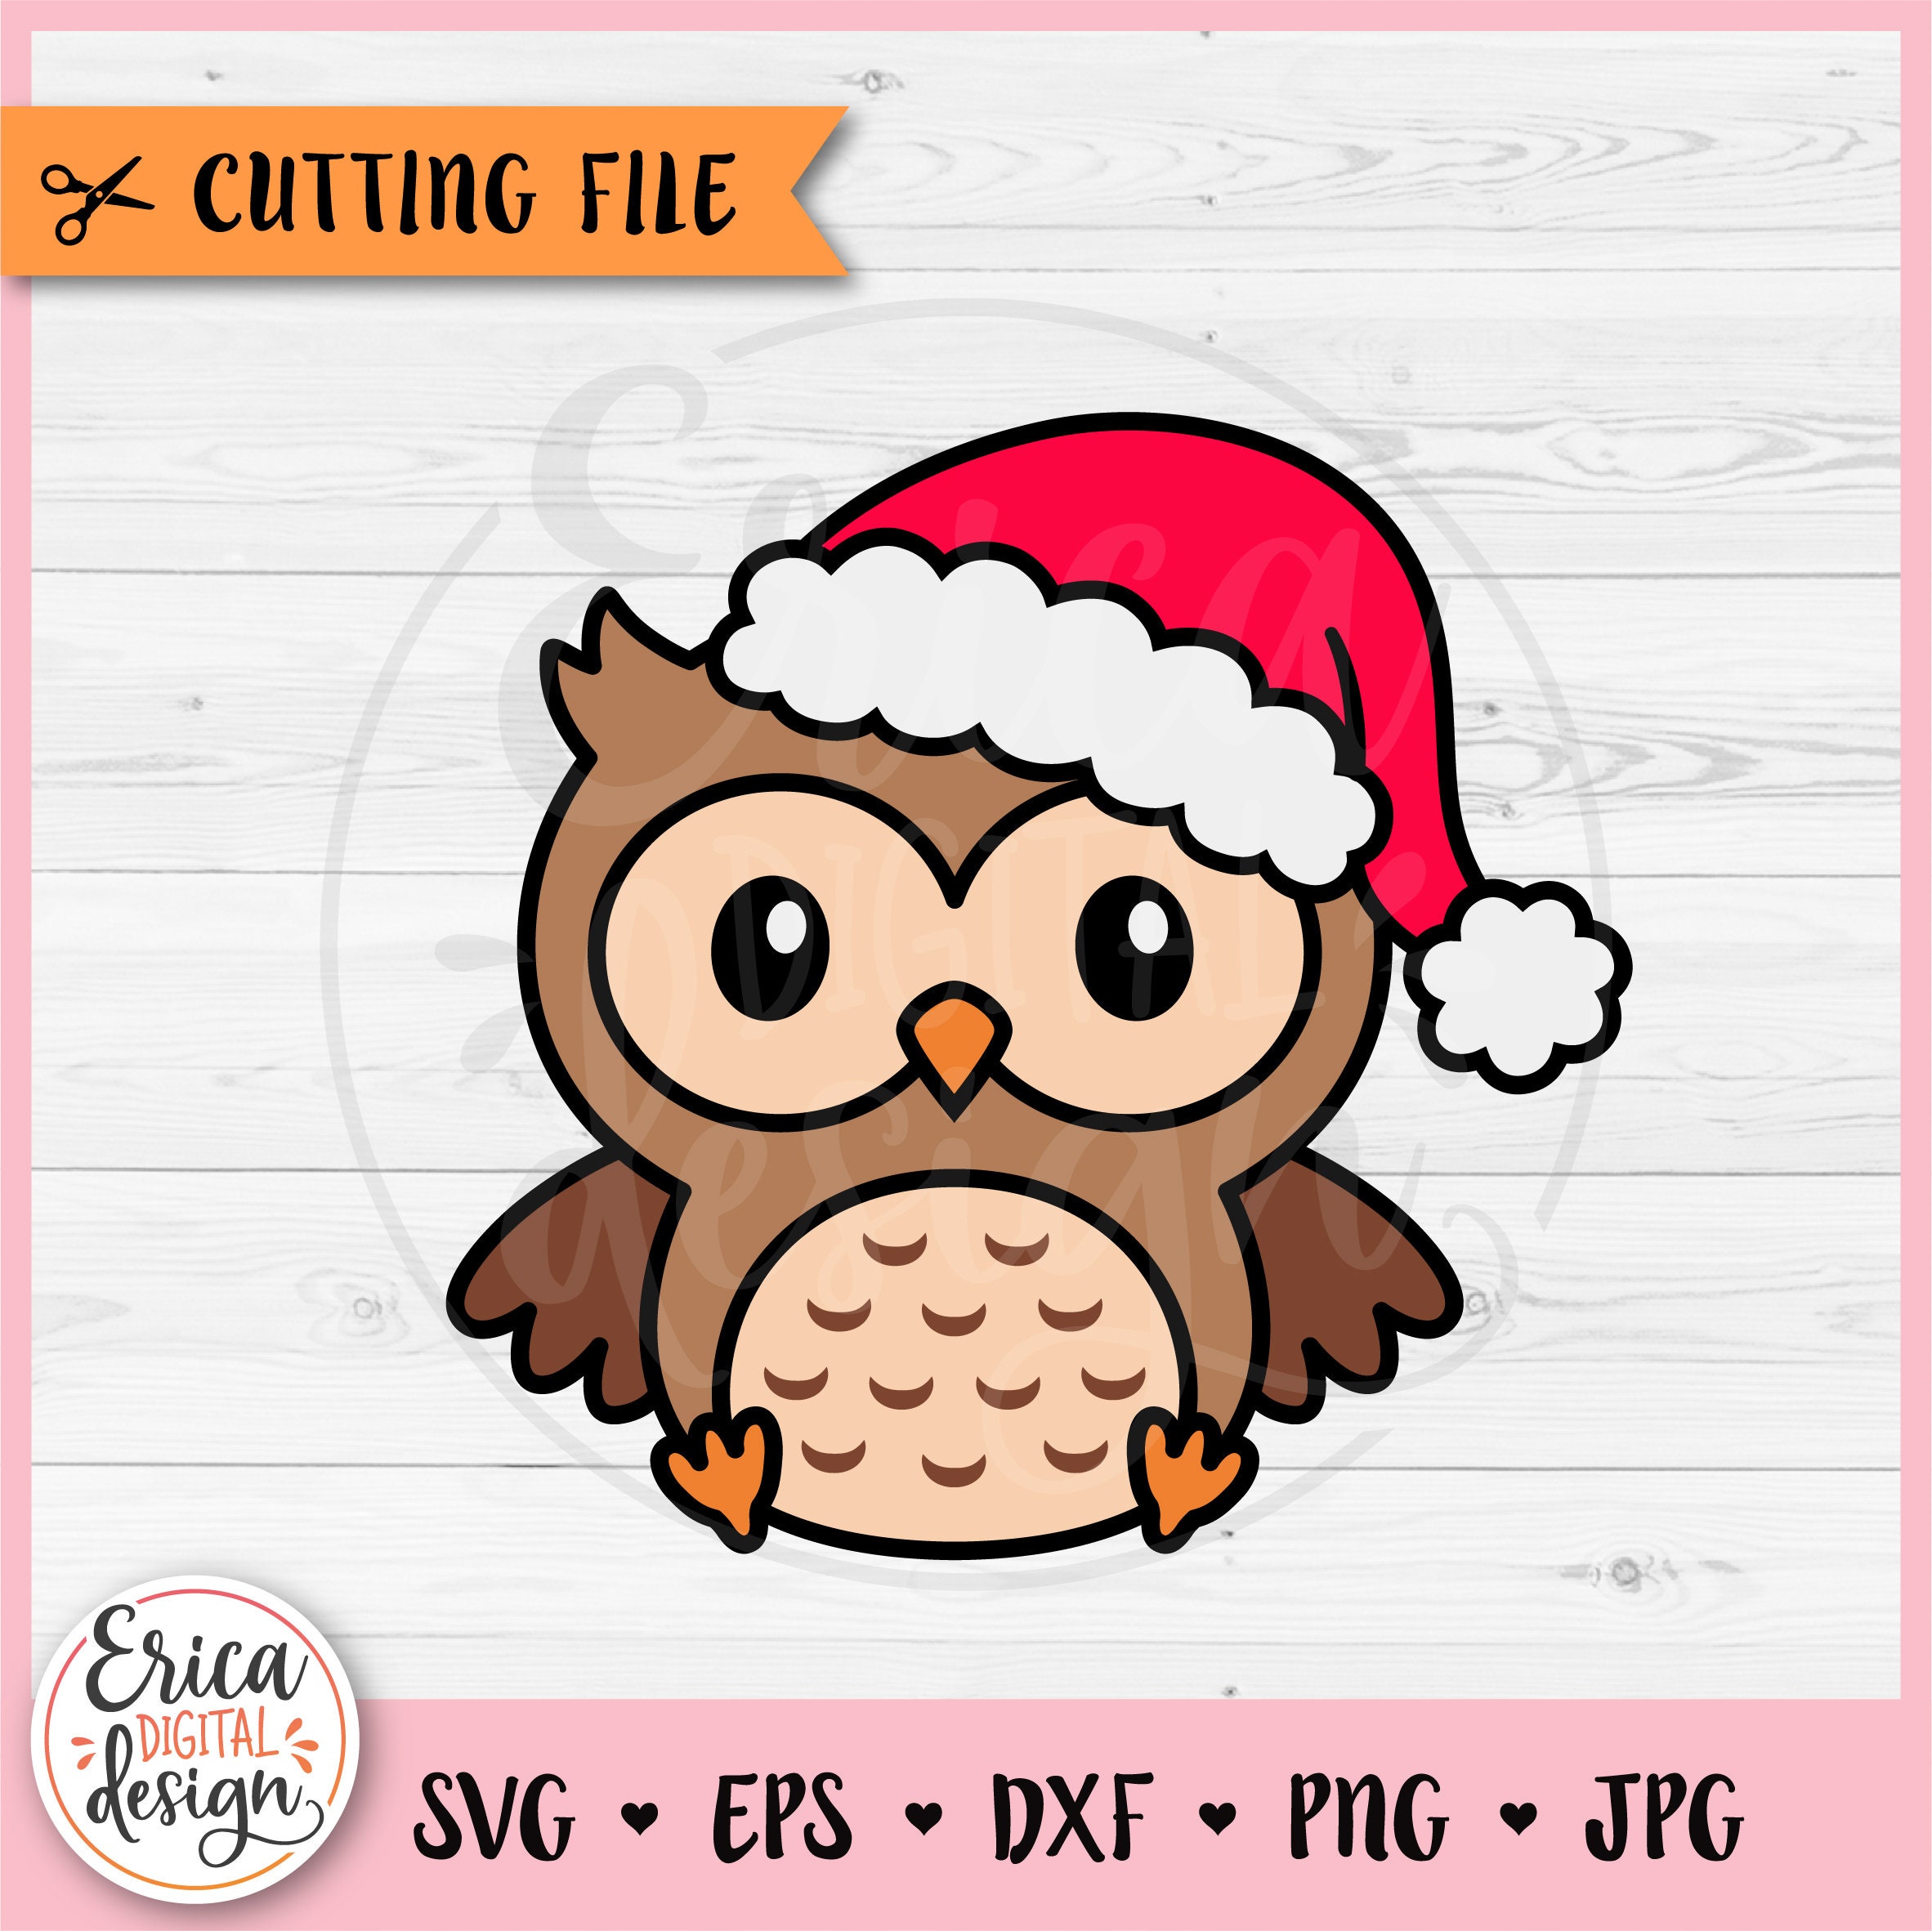 Brown Bear Iron On Transfer Design Instant Download – Jolly Owl